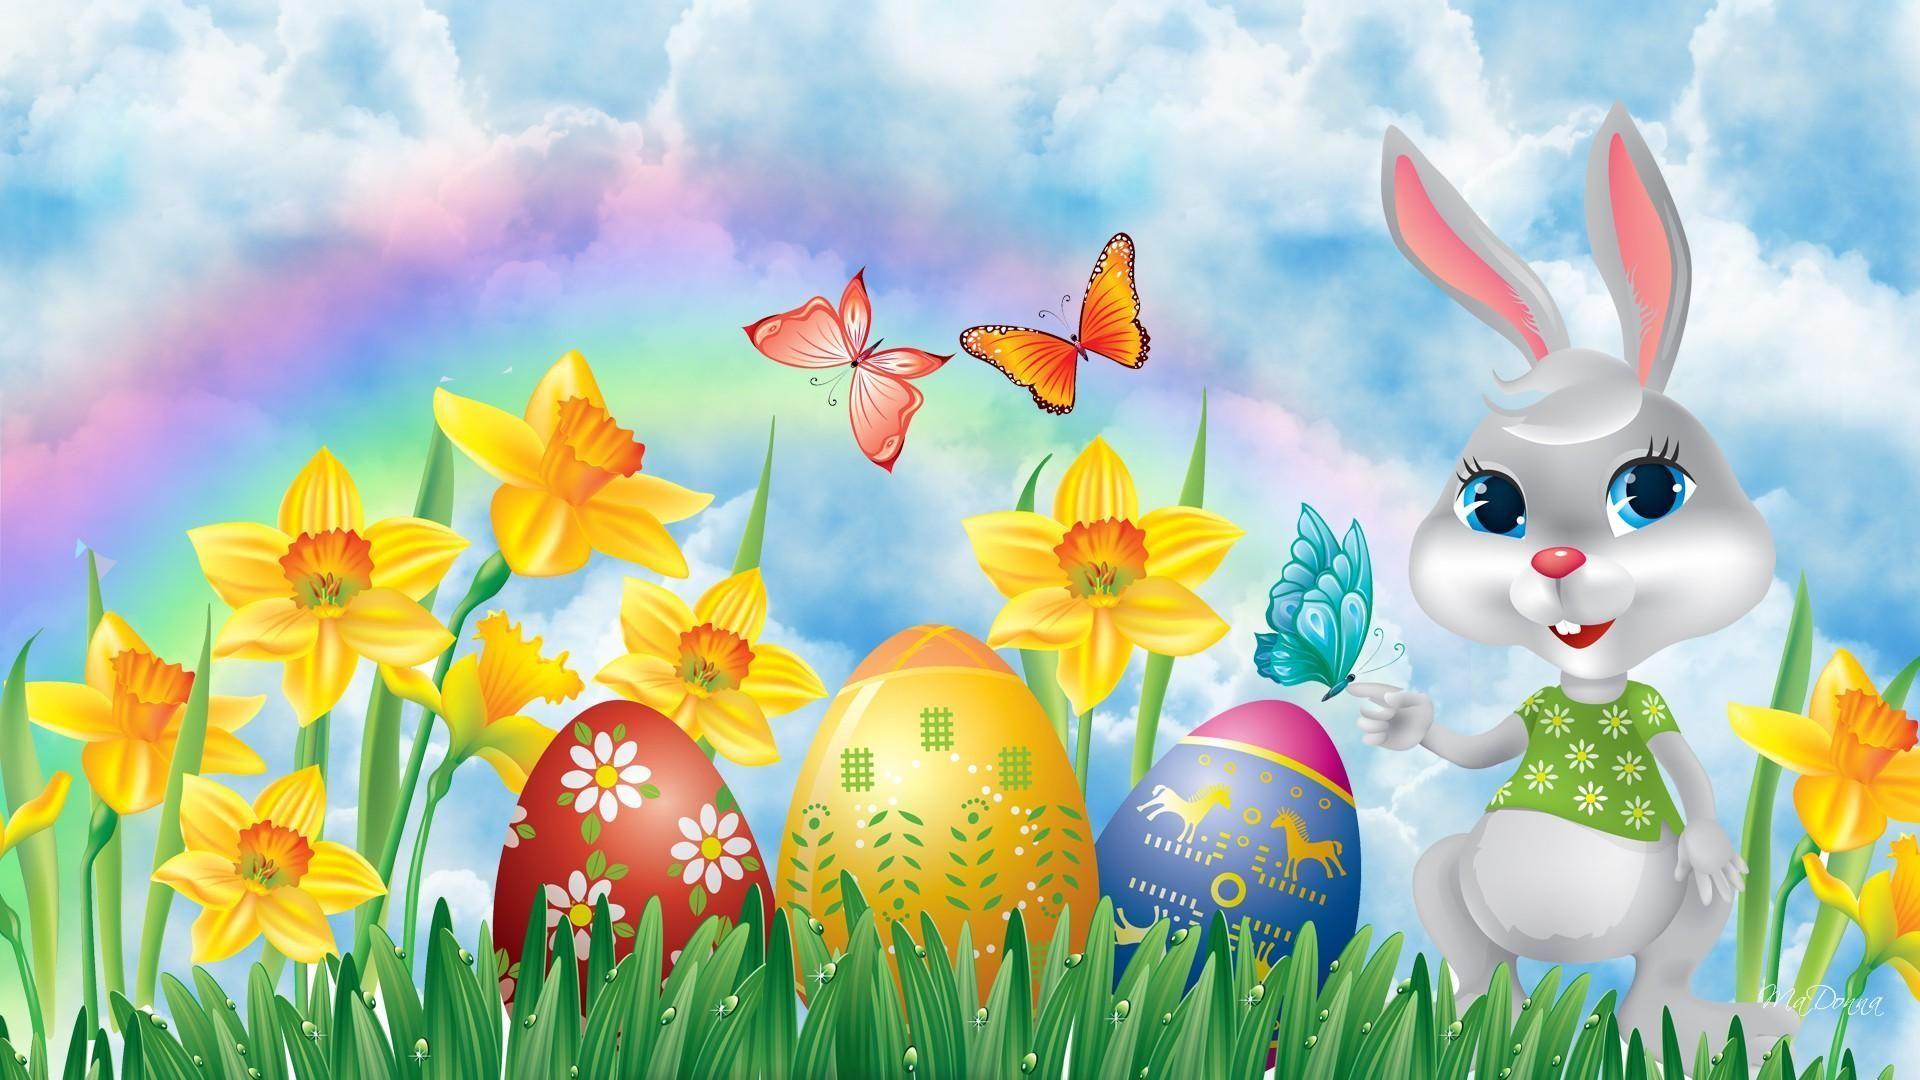 Cute bunny and colored eggs Easter 2K wallpaper download